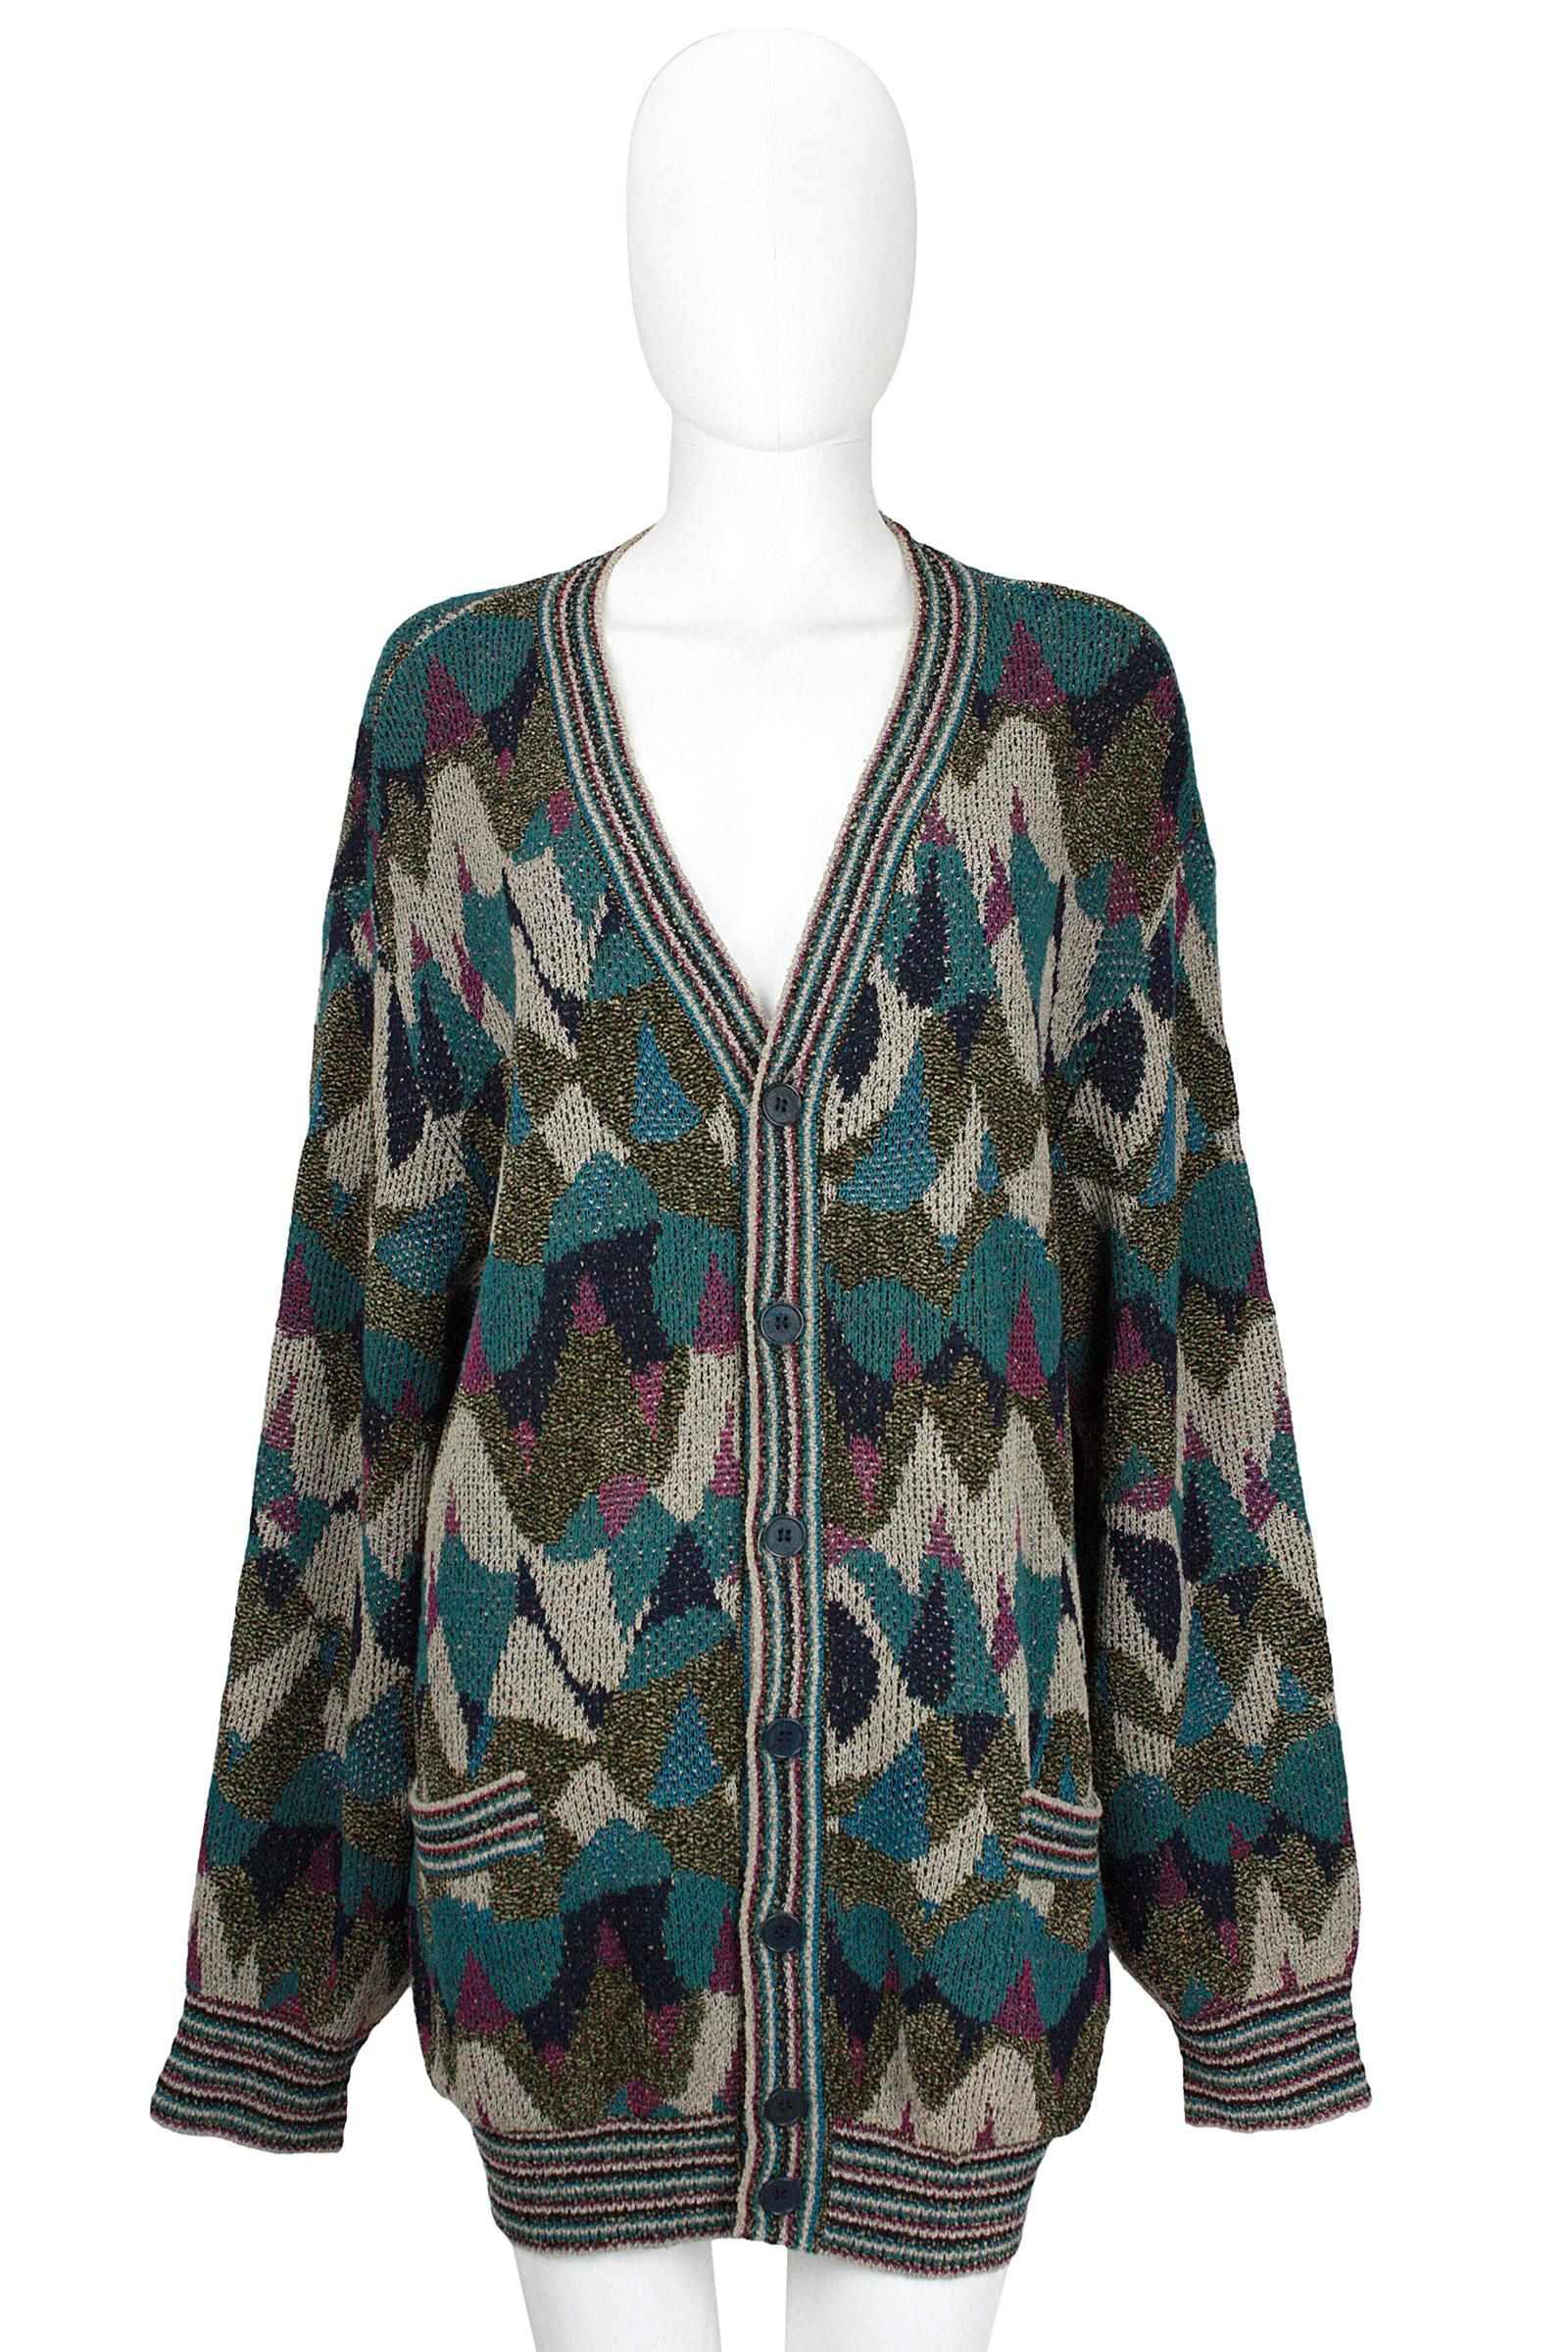 Missoni 
Knit v-neck cardigan 
Knit stripe trim 
Soft weave that stretches 
Viscose blend
Abstract pattern
Navy buttons 